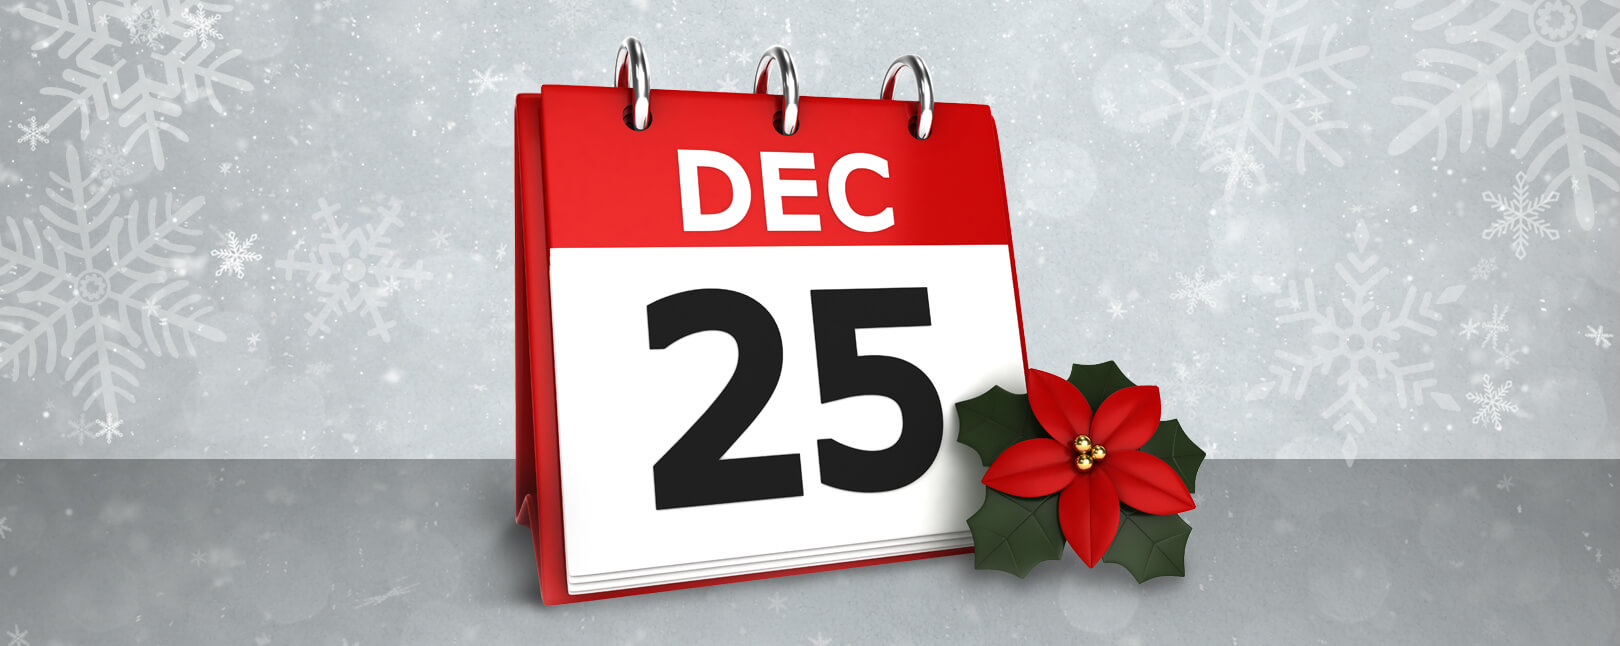 Holiday eCommerce: The 12 Days Before Christmas